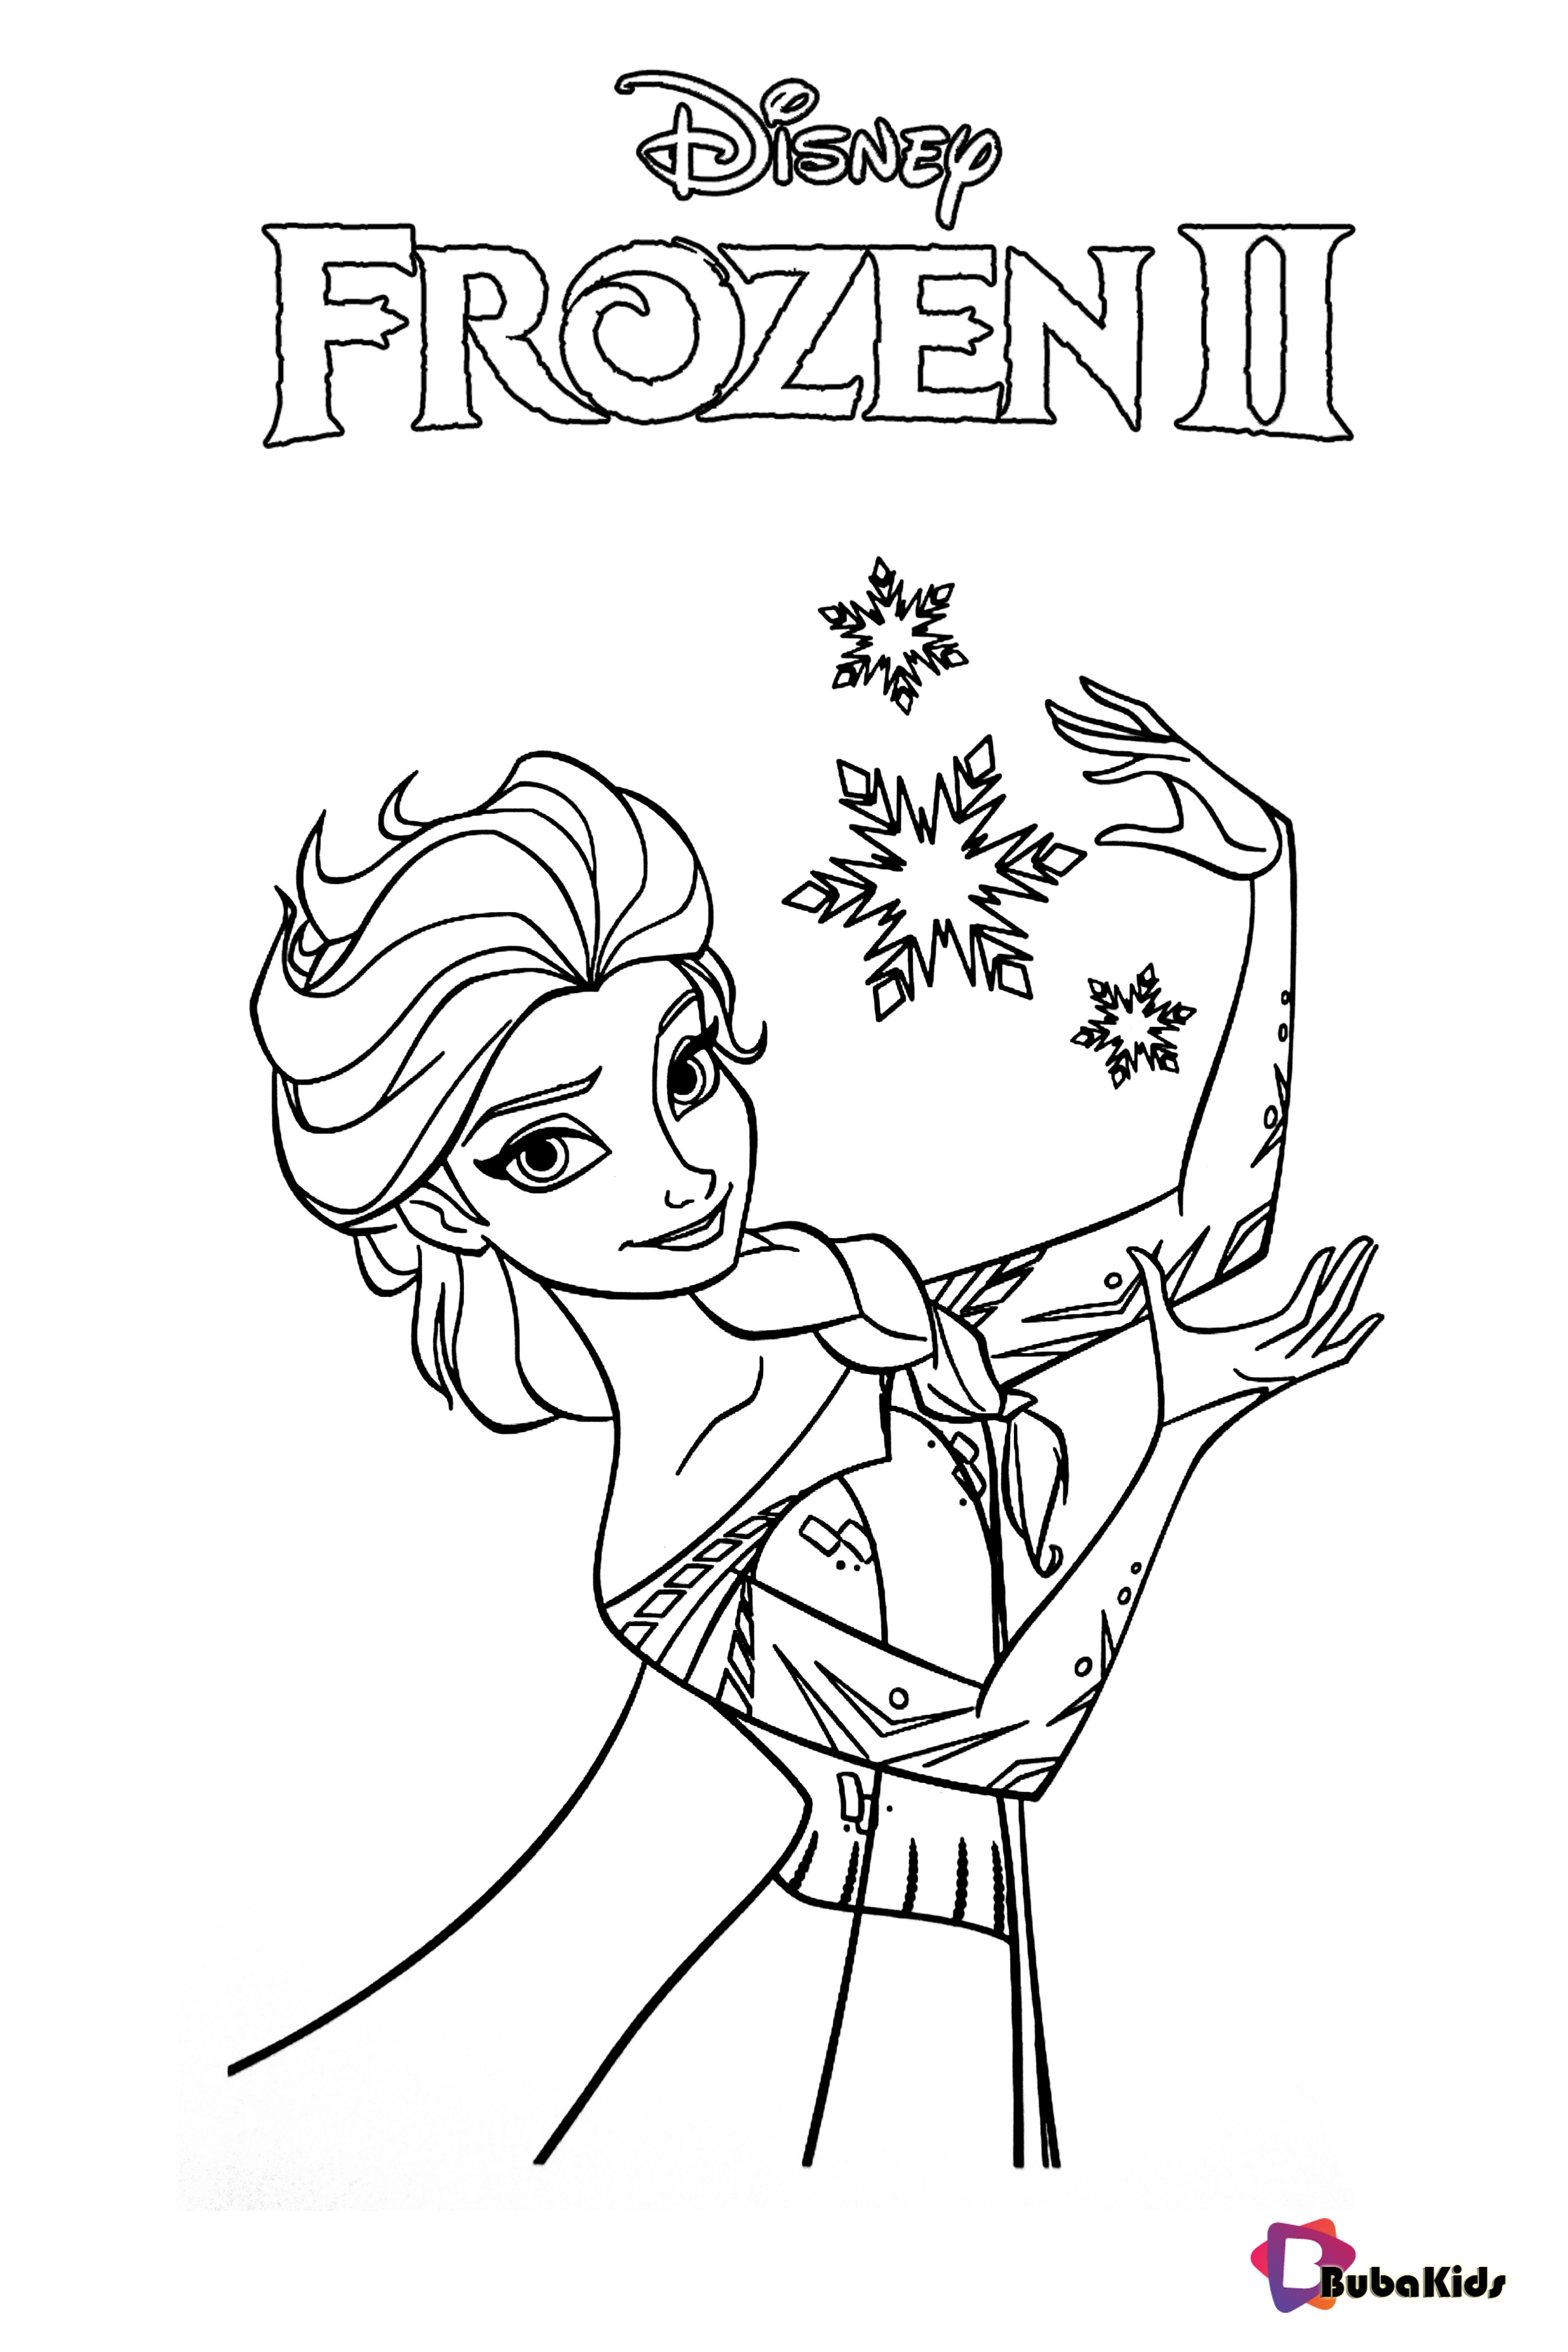 coloring frozen elsa printable disney olaf anna princess number colouring sheets bubakids picturethemagic books kristoff sven connect printables queen cartoon